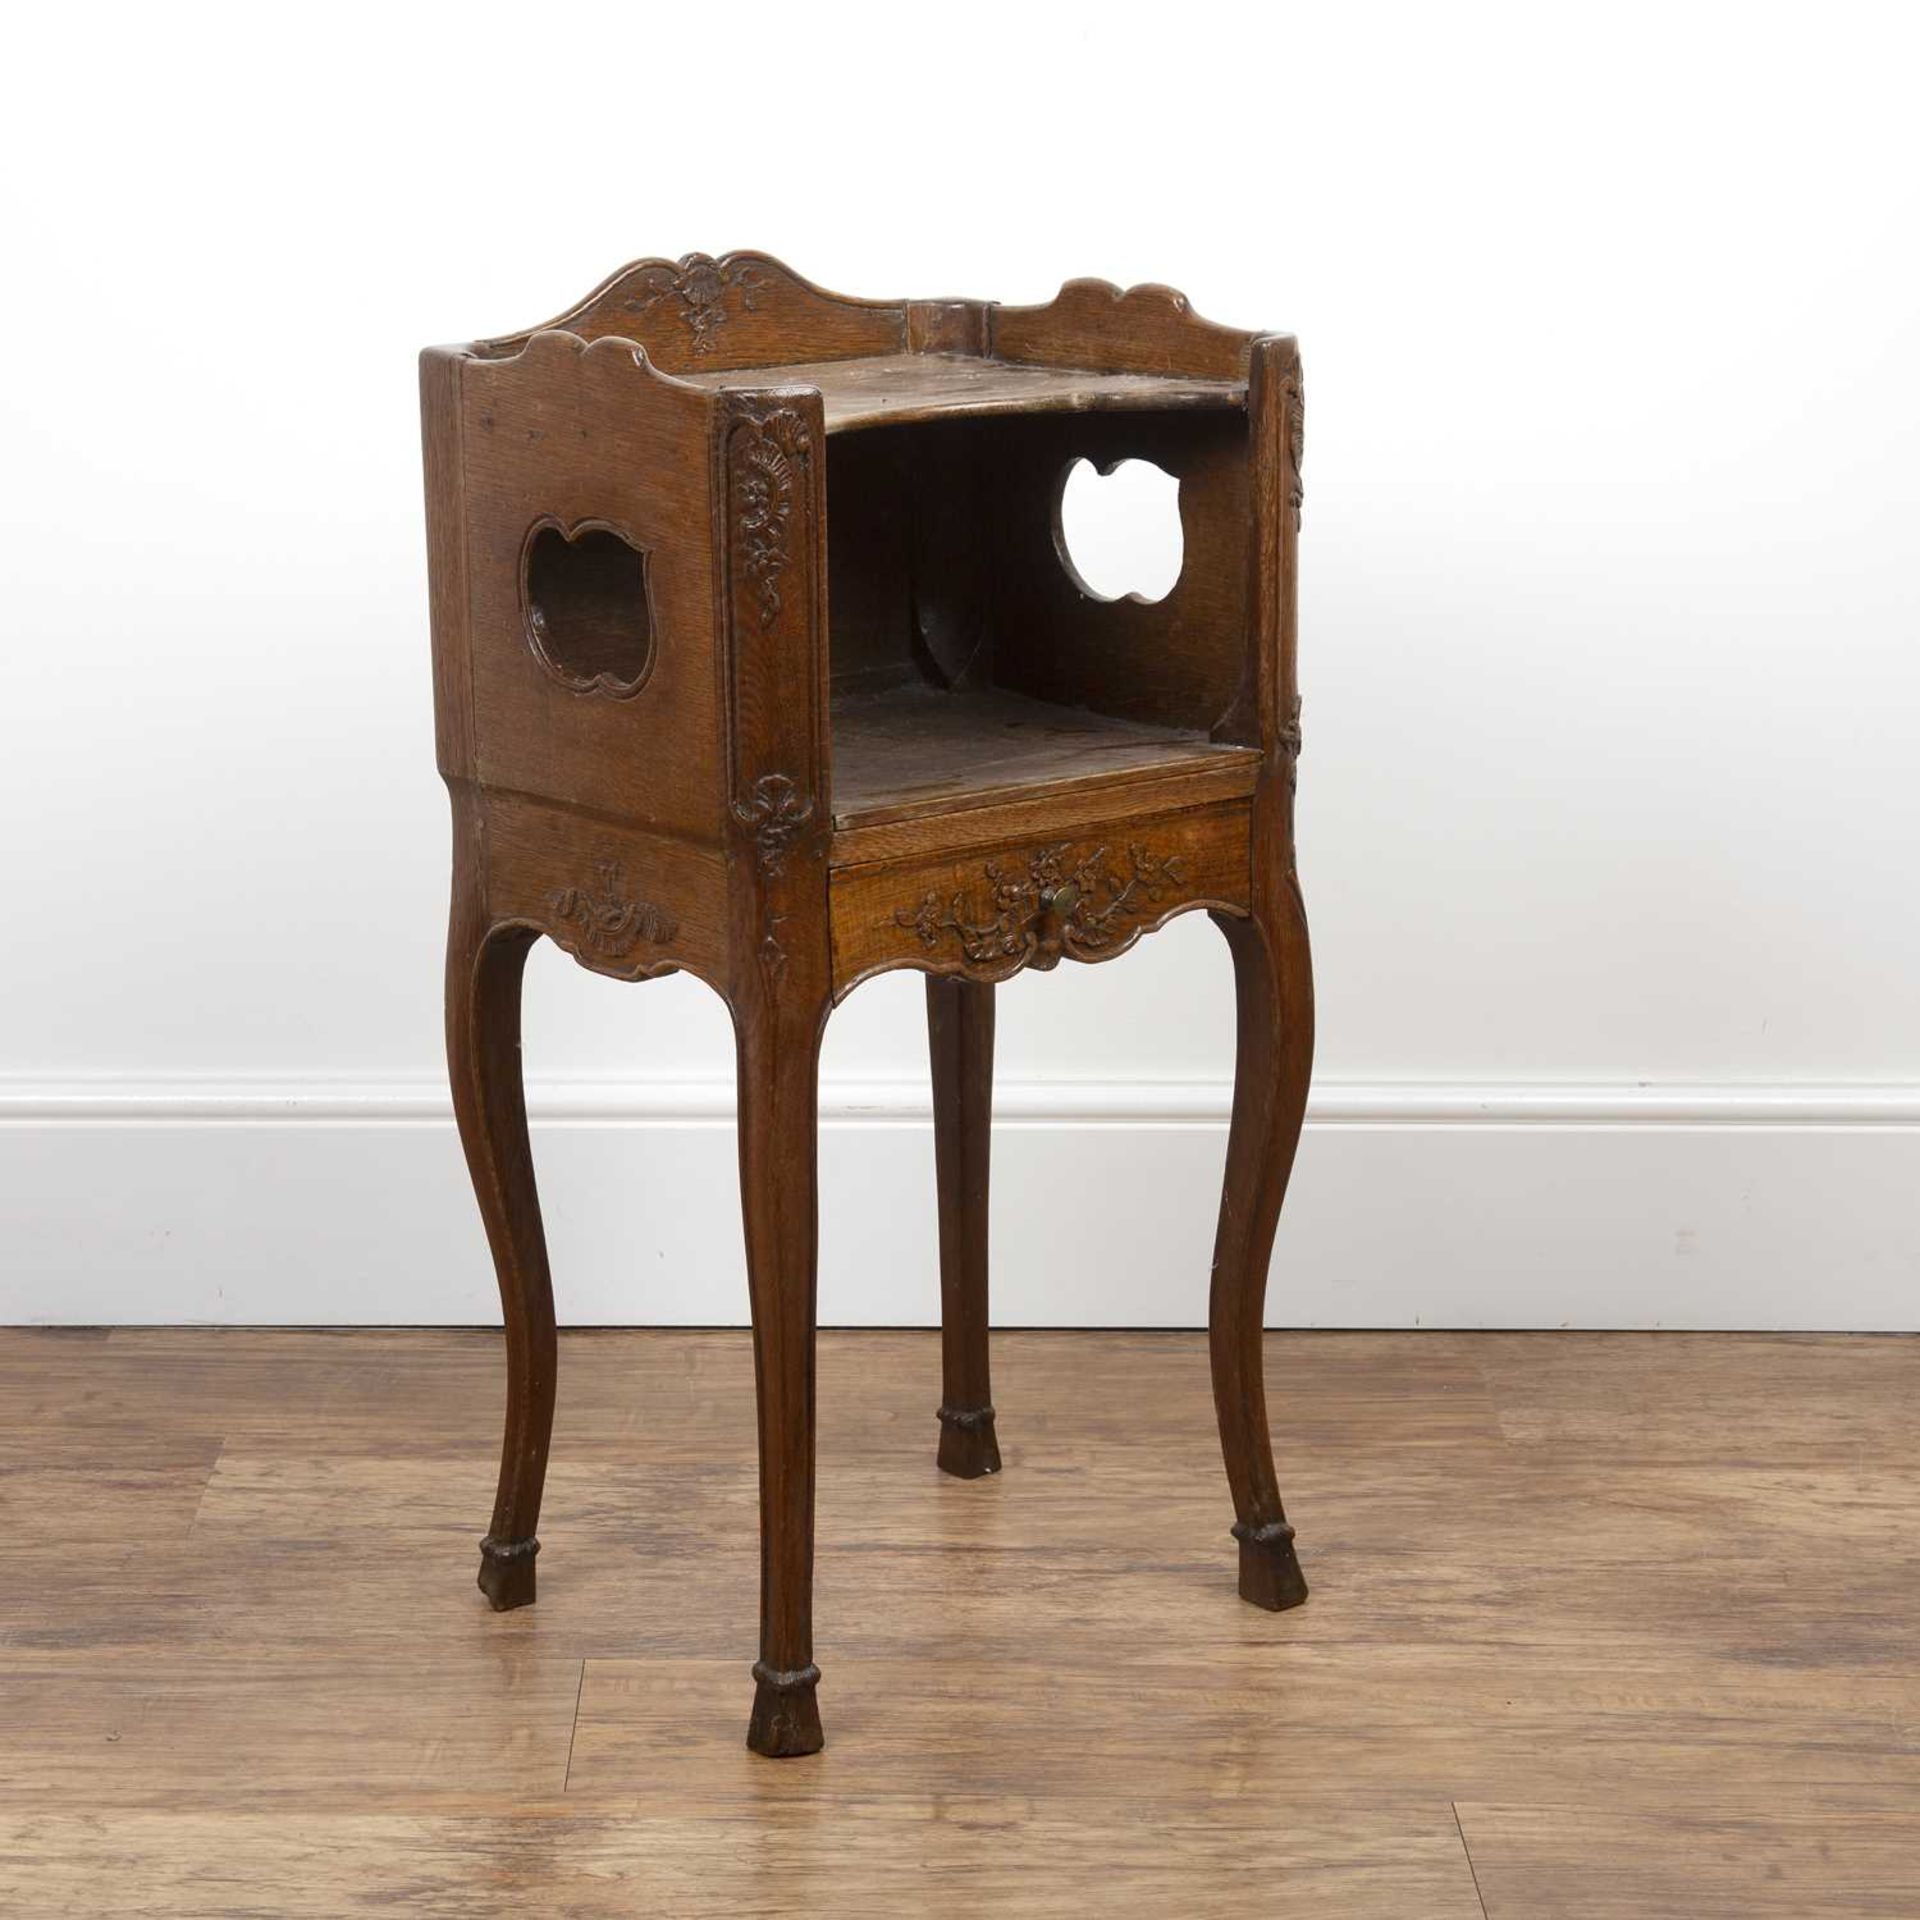 Oak bedside table or side table French Provincial, 19th Century, with shaped galleried top, - Image 2 of 6